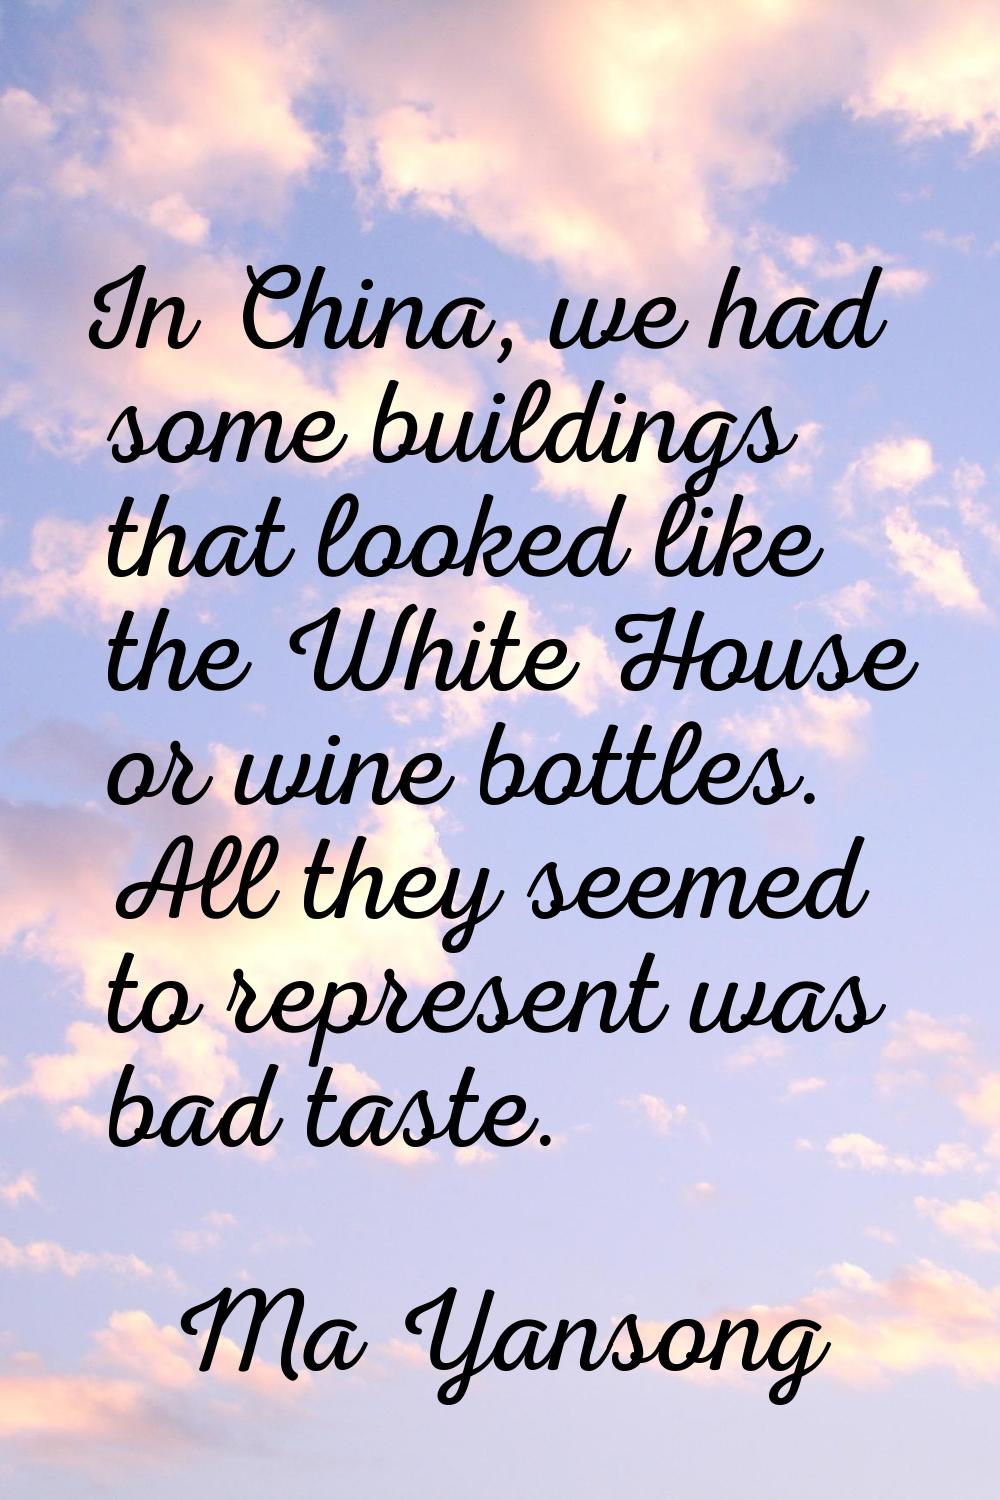 In China, we had some buildings that looked like the White House or wine bottles. All they seemed t